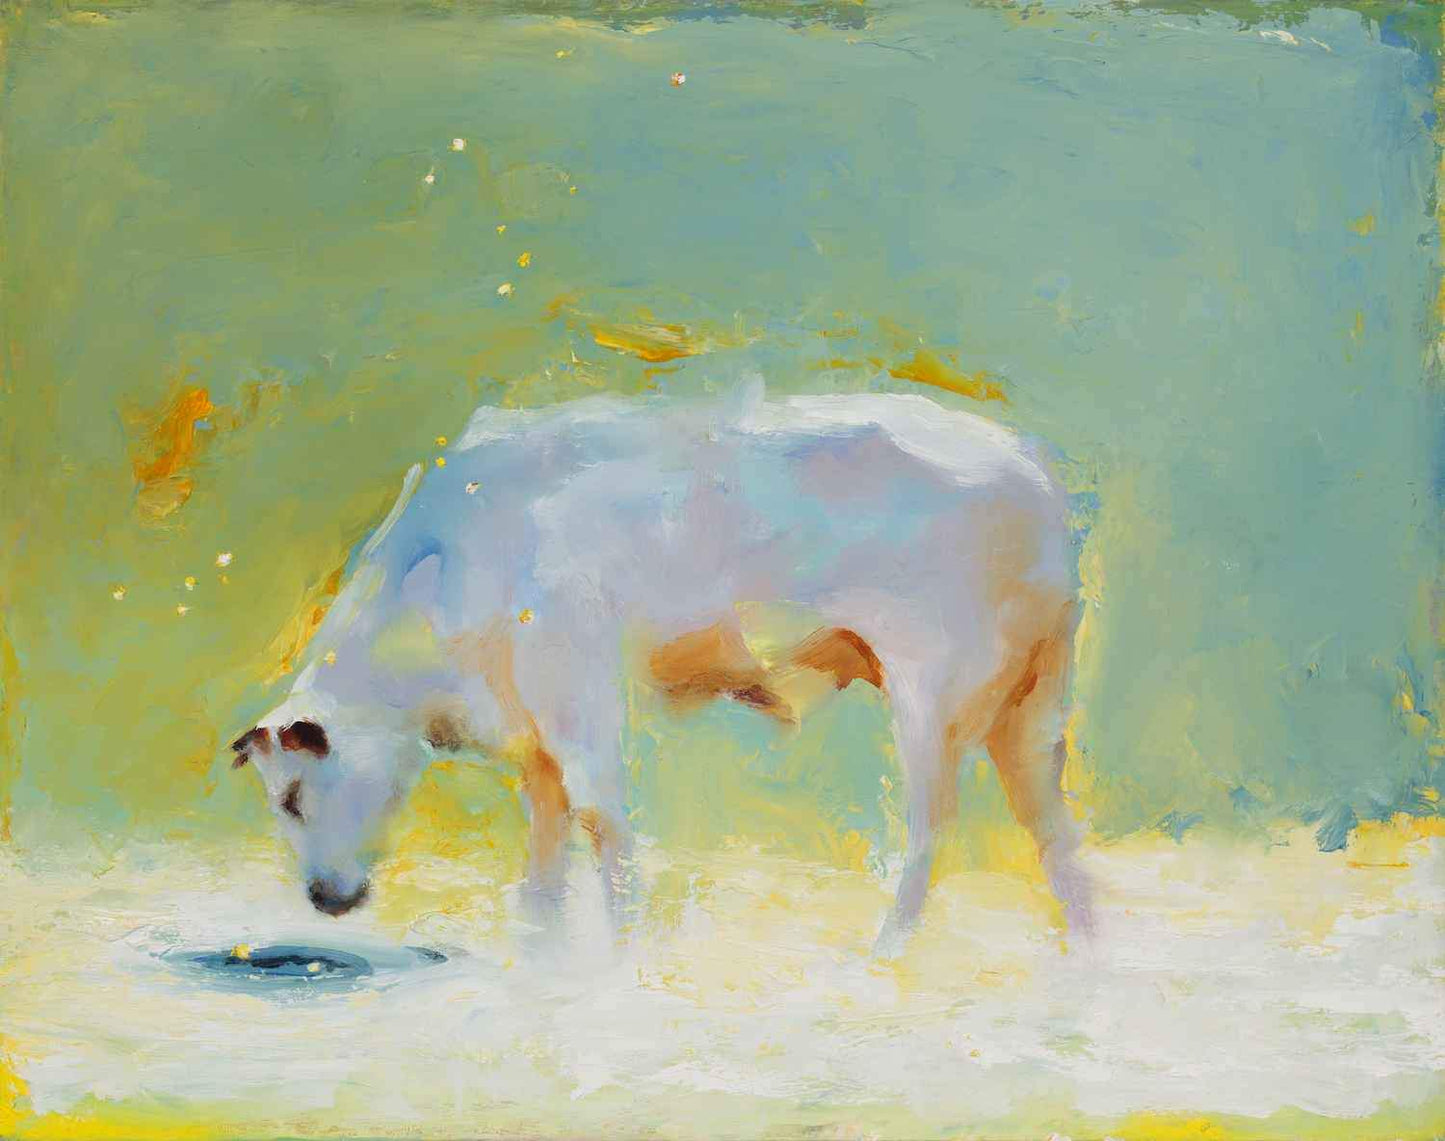 A soft soothing image of a cow standing and drinking from a pond. White Cow, blue-green sky and a white pond. 